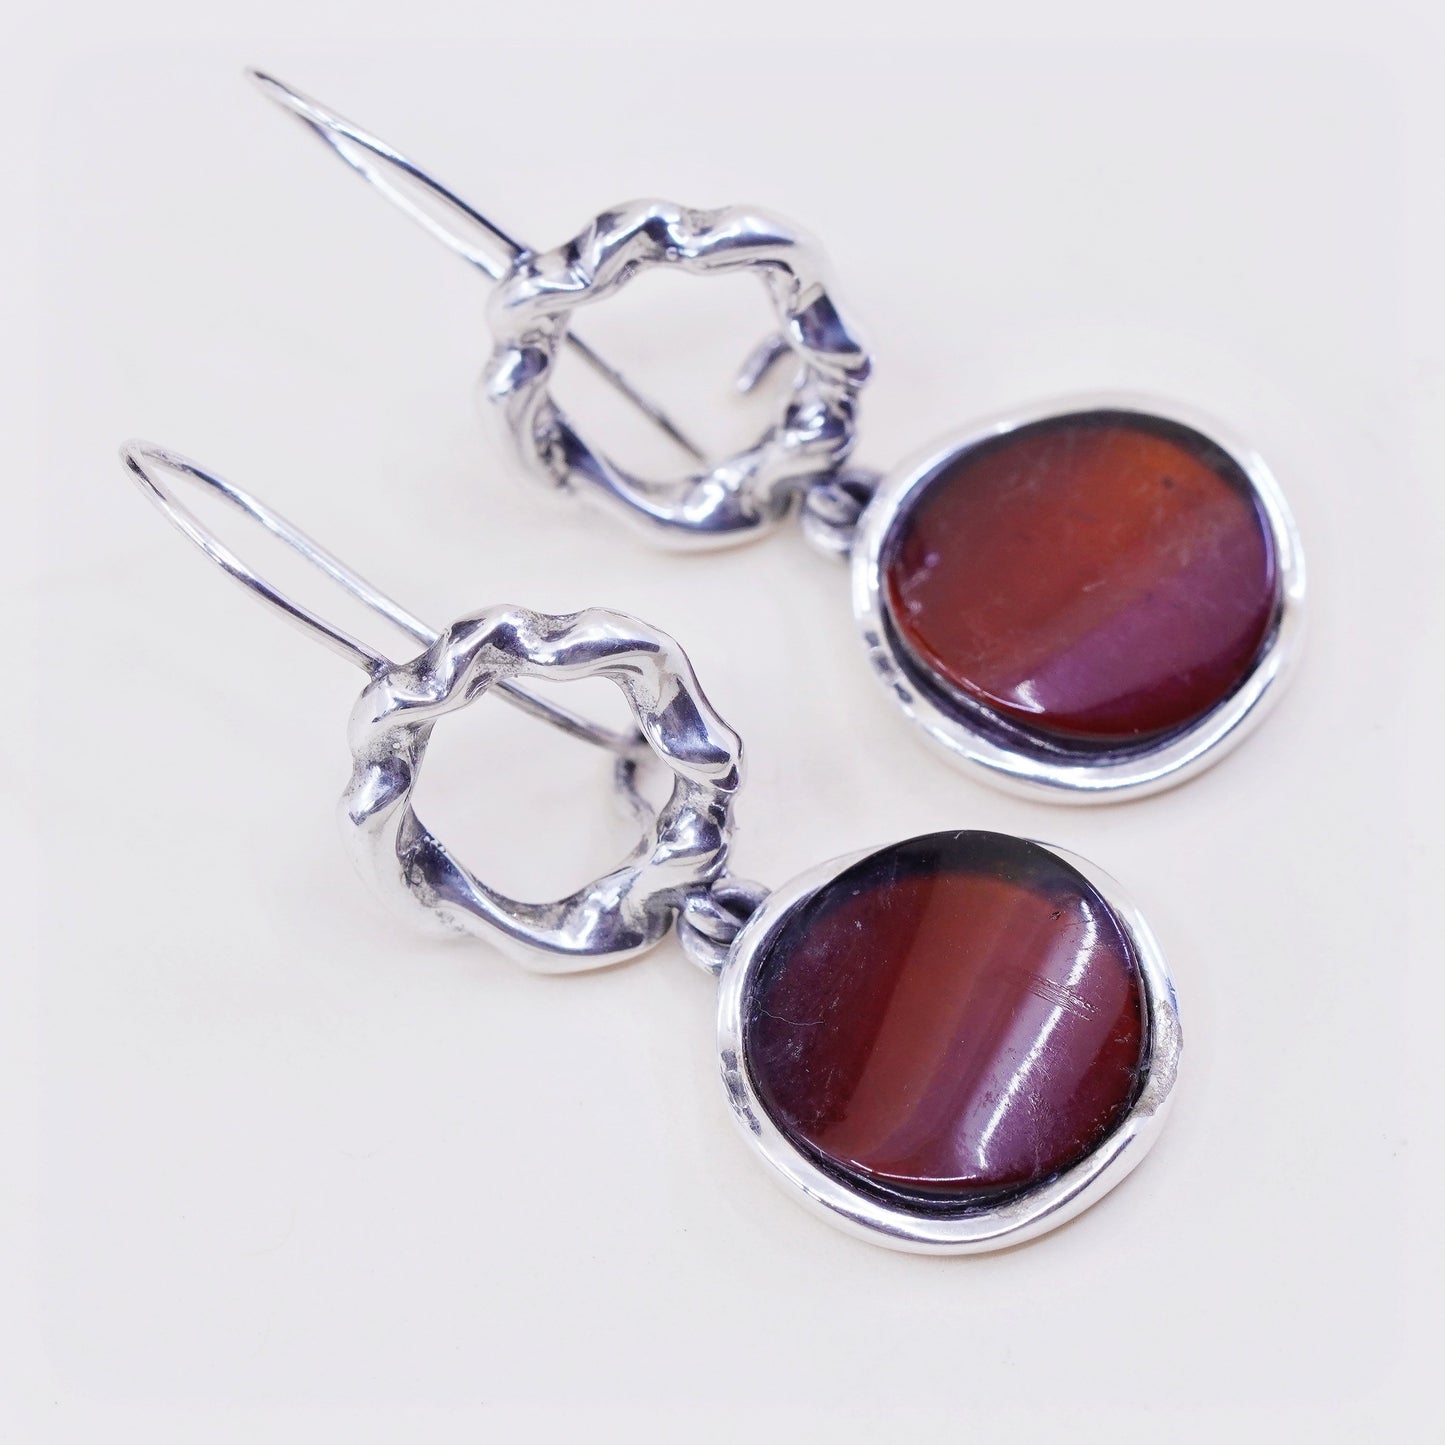 Vintage liquid Sterling silver handmade earrings, 925 circle with amber drops